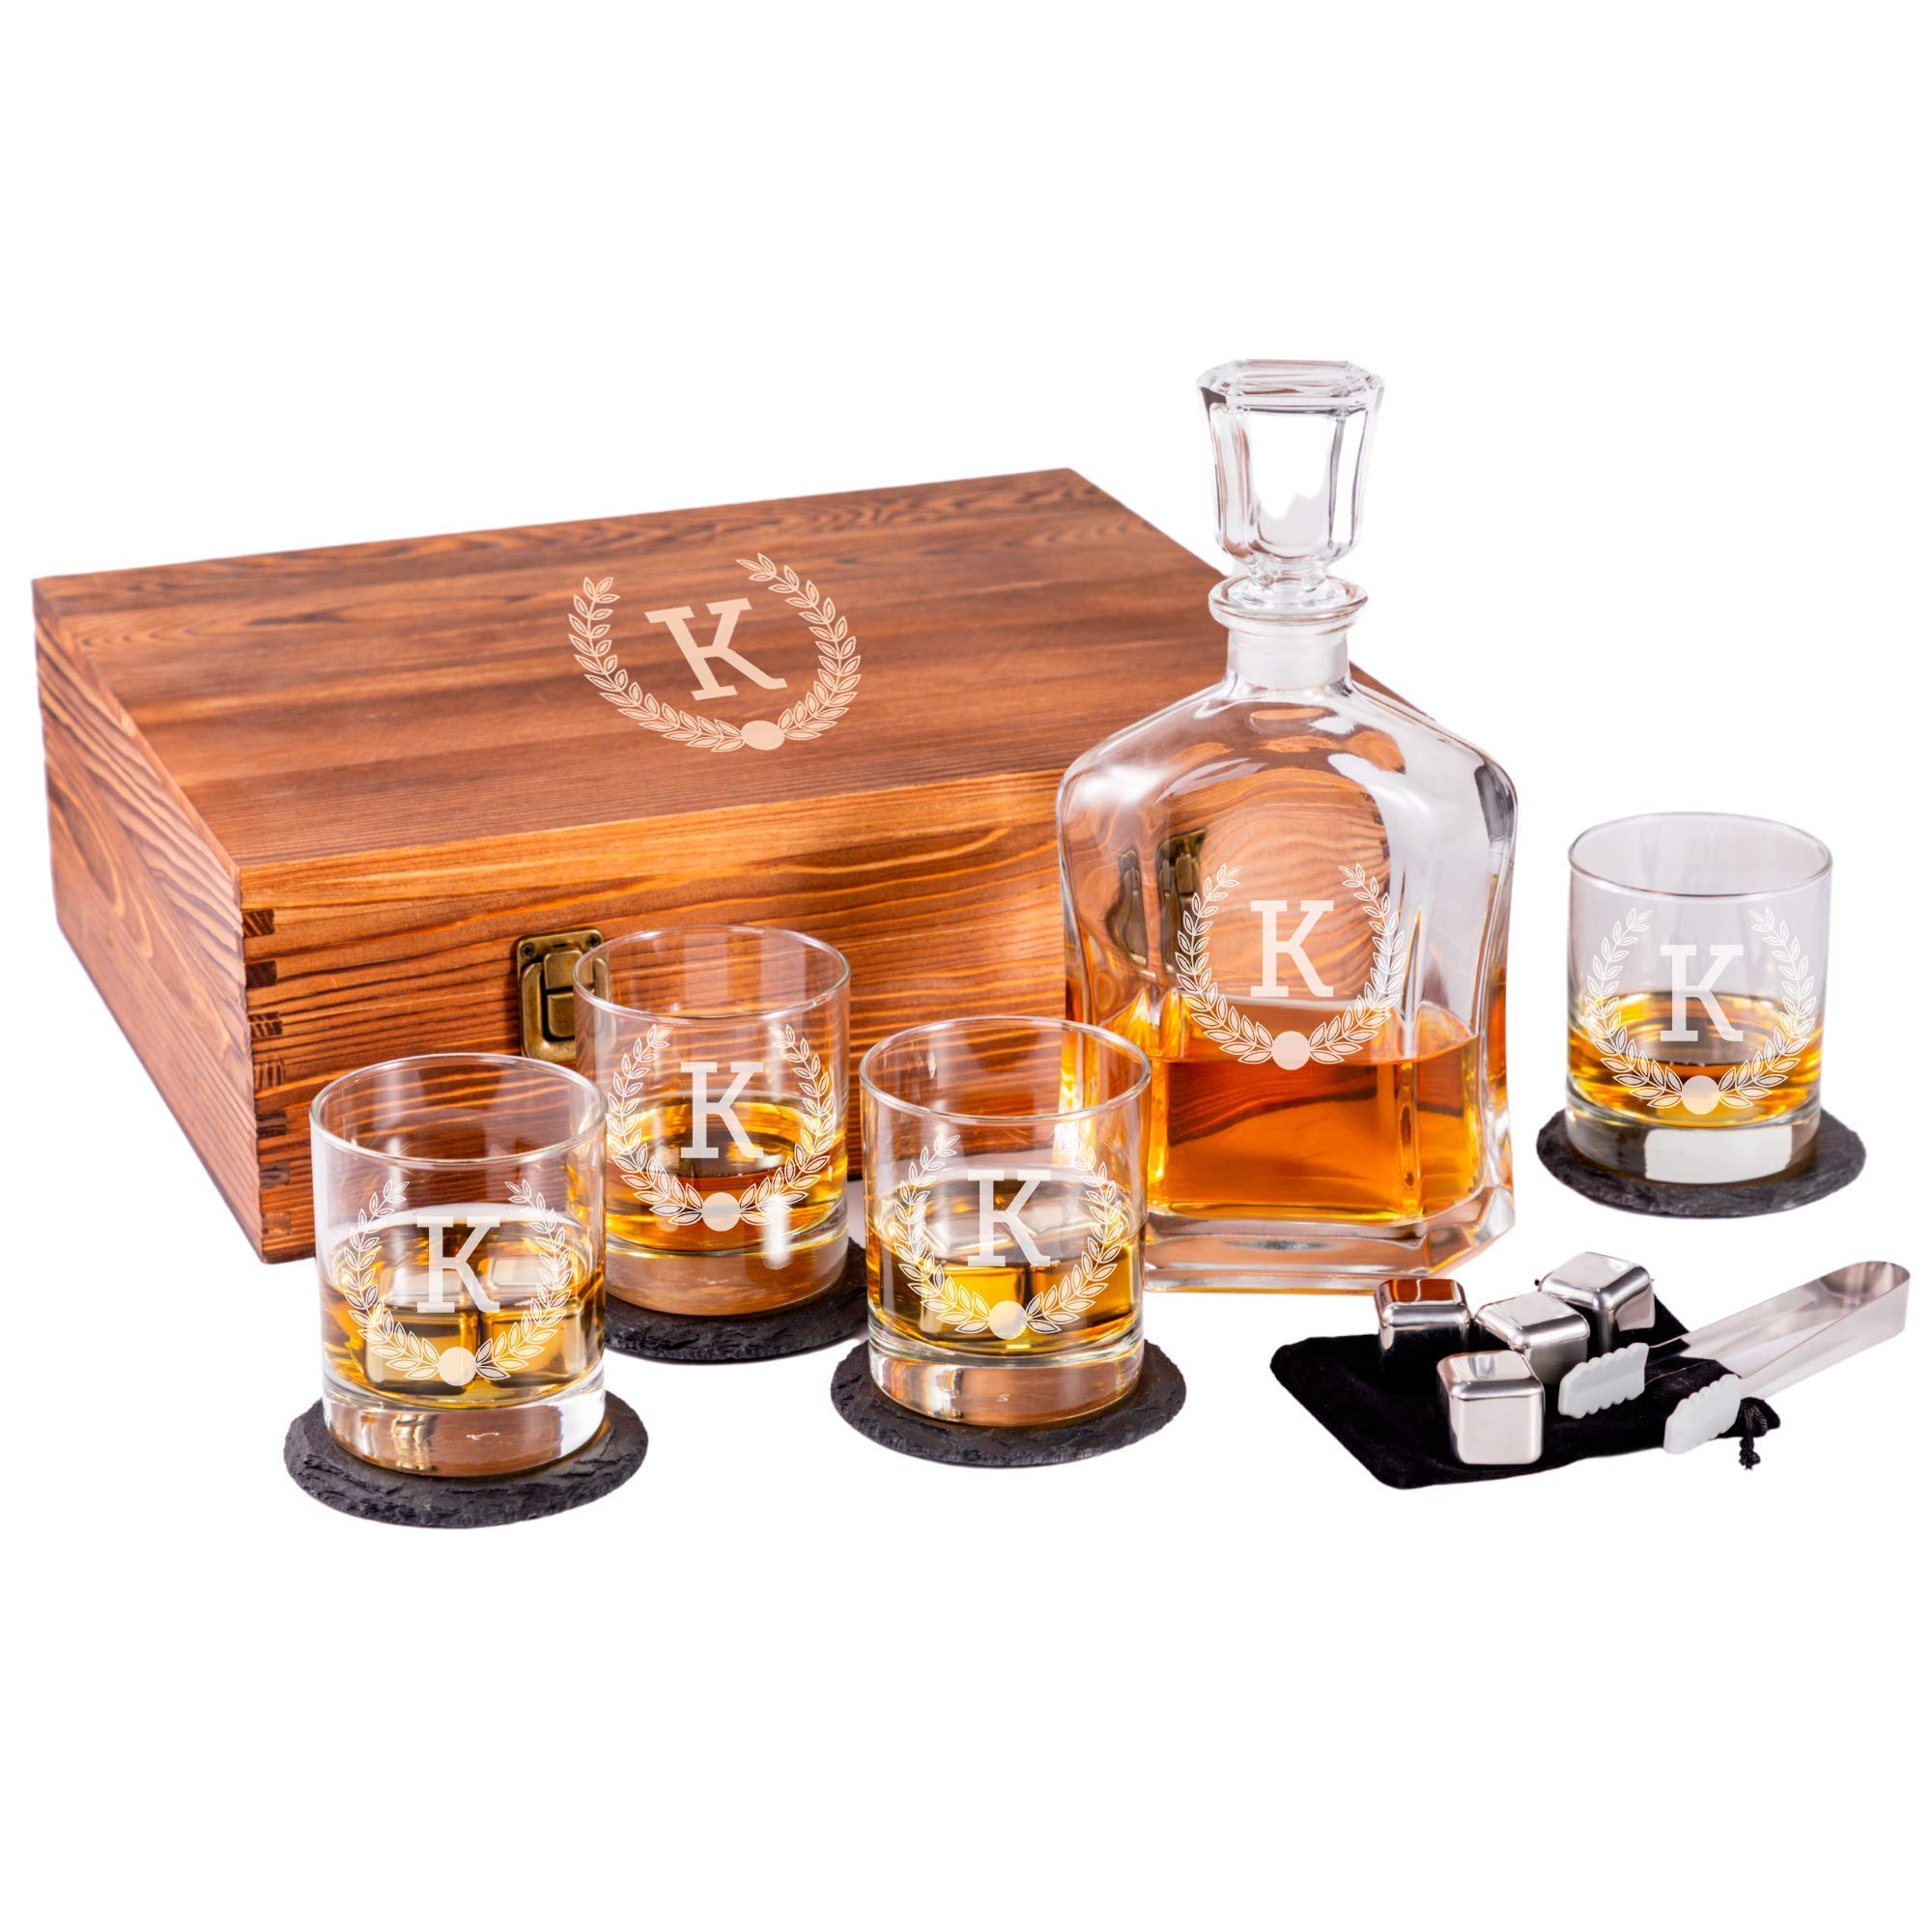 Personalized Whiskey Decanter Set